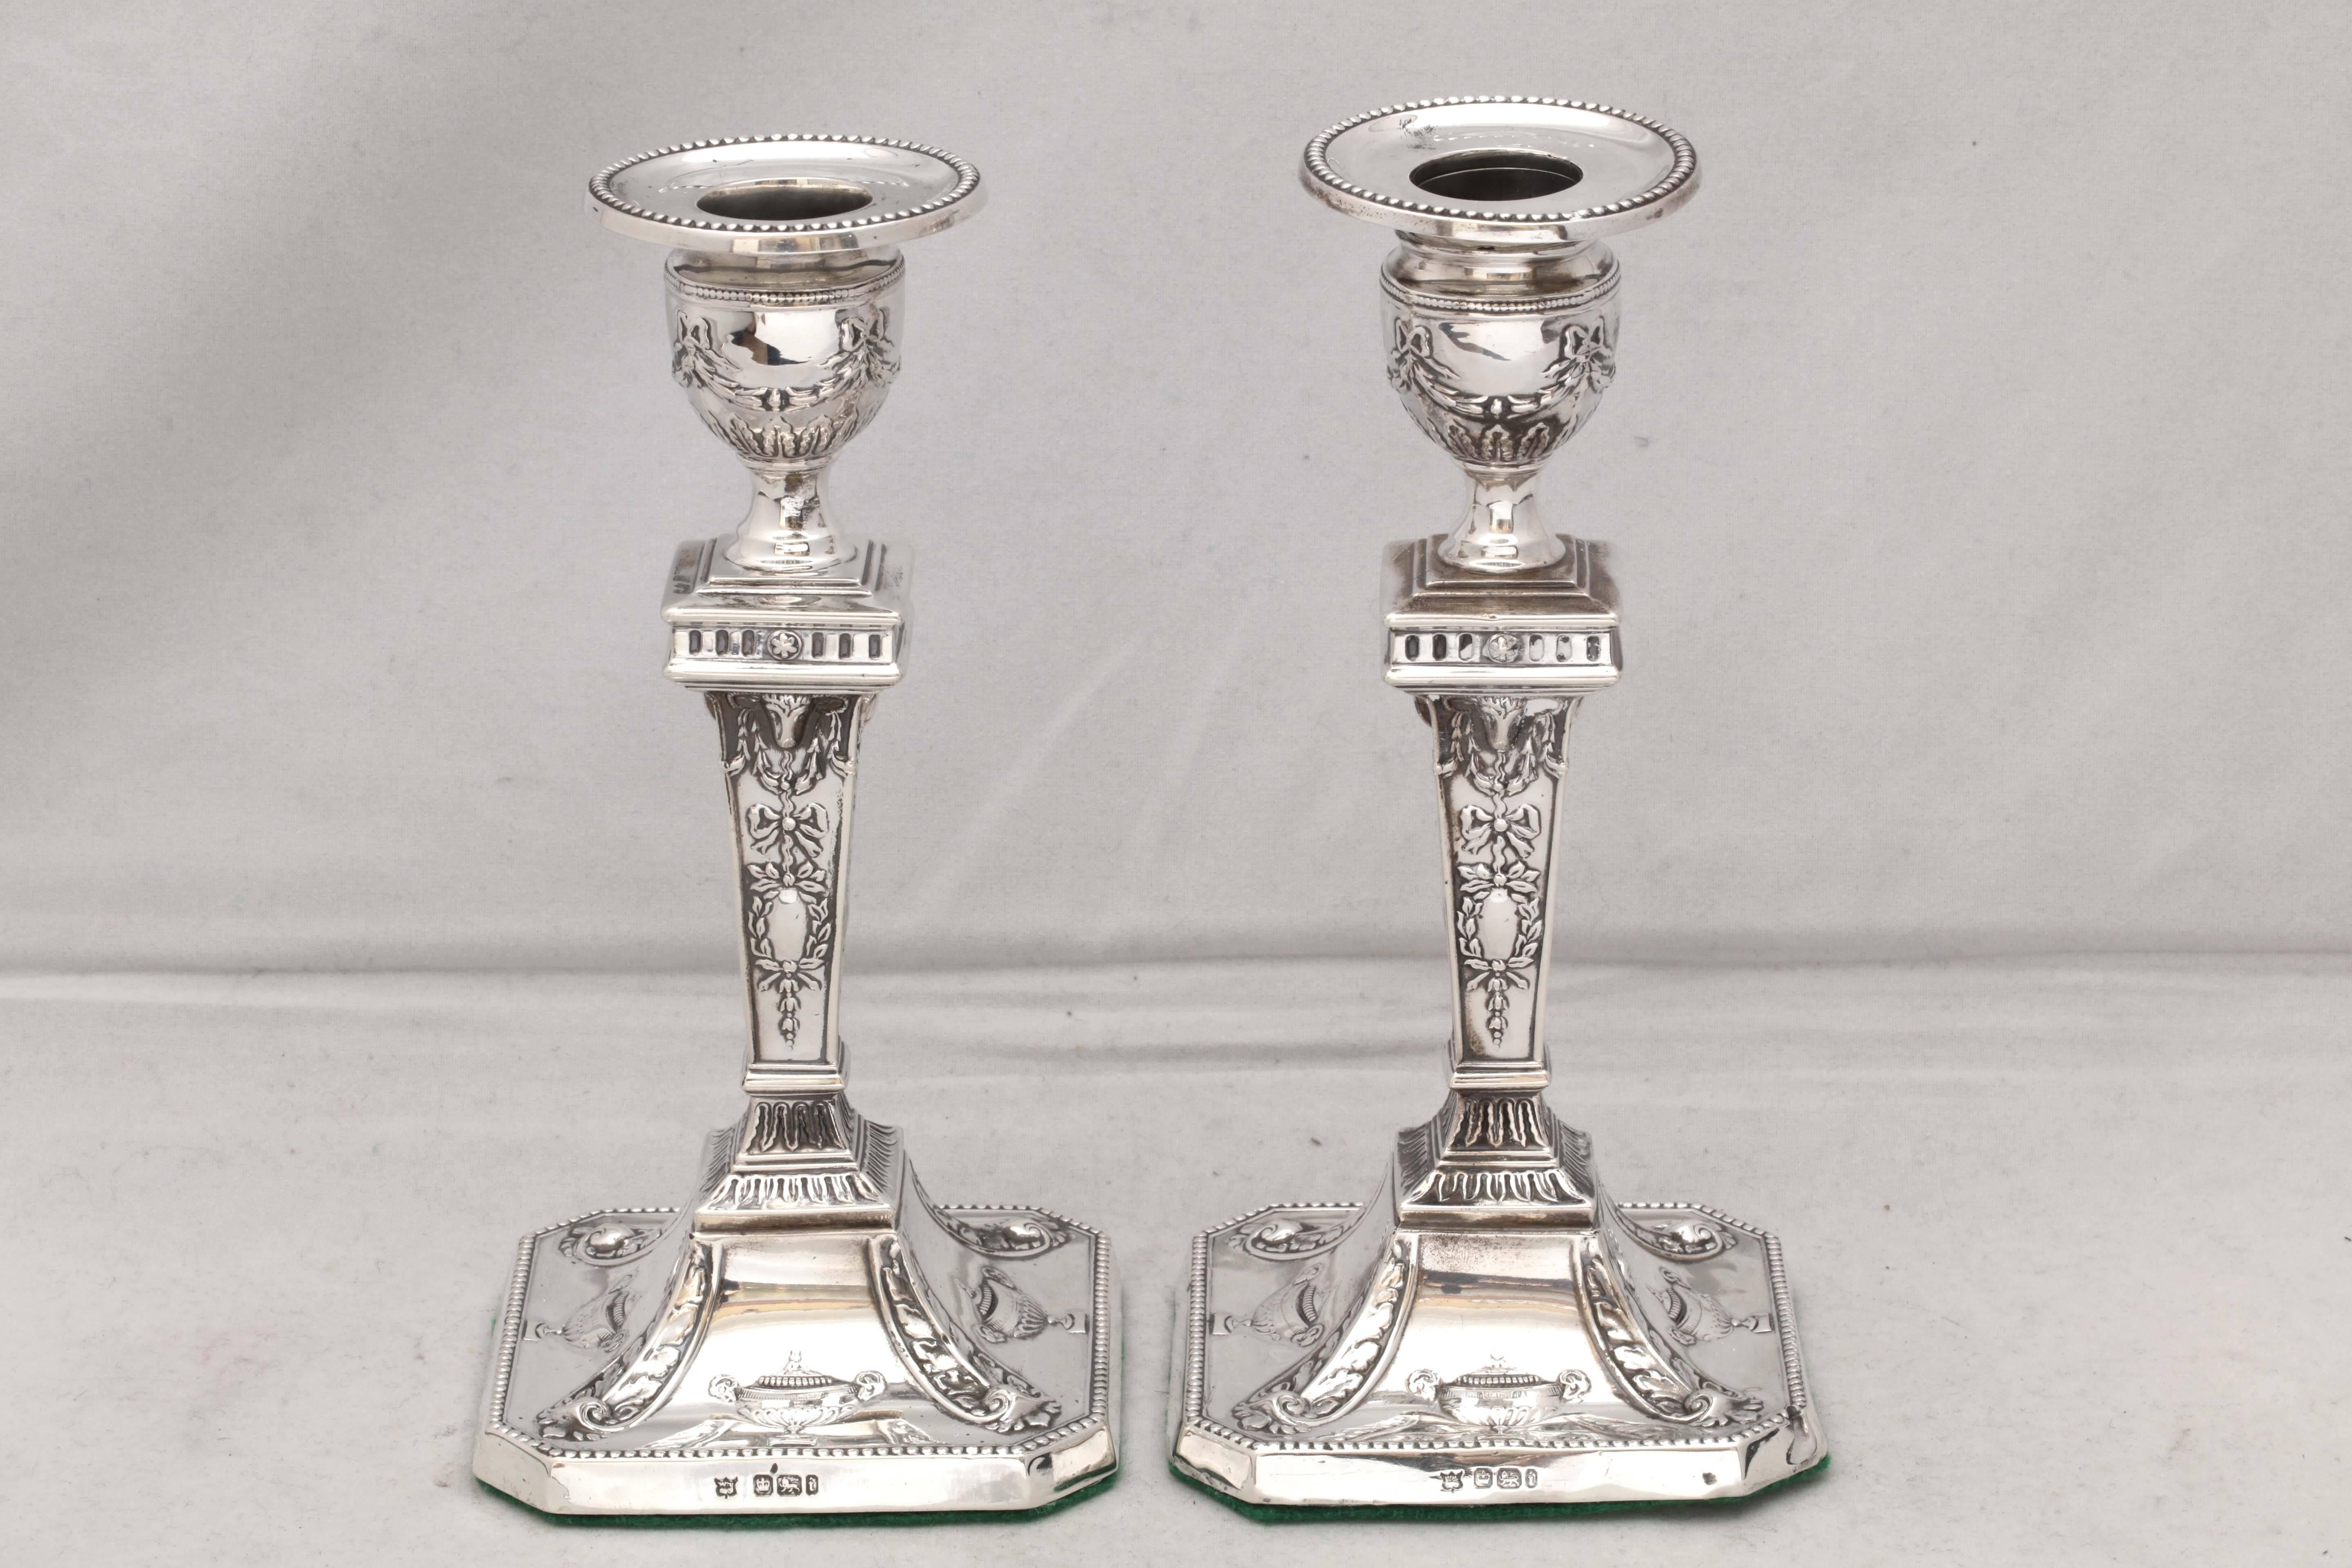 Pair of Edwardian, sterling silver, Adam style candlesticks, Sheffield, England, 1901, William Latham & Son - makers. Octagonal base of each candlestick is decorated with urns and has a beaded border; this & beaded motif is continued on the bobeche